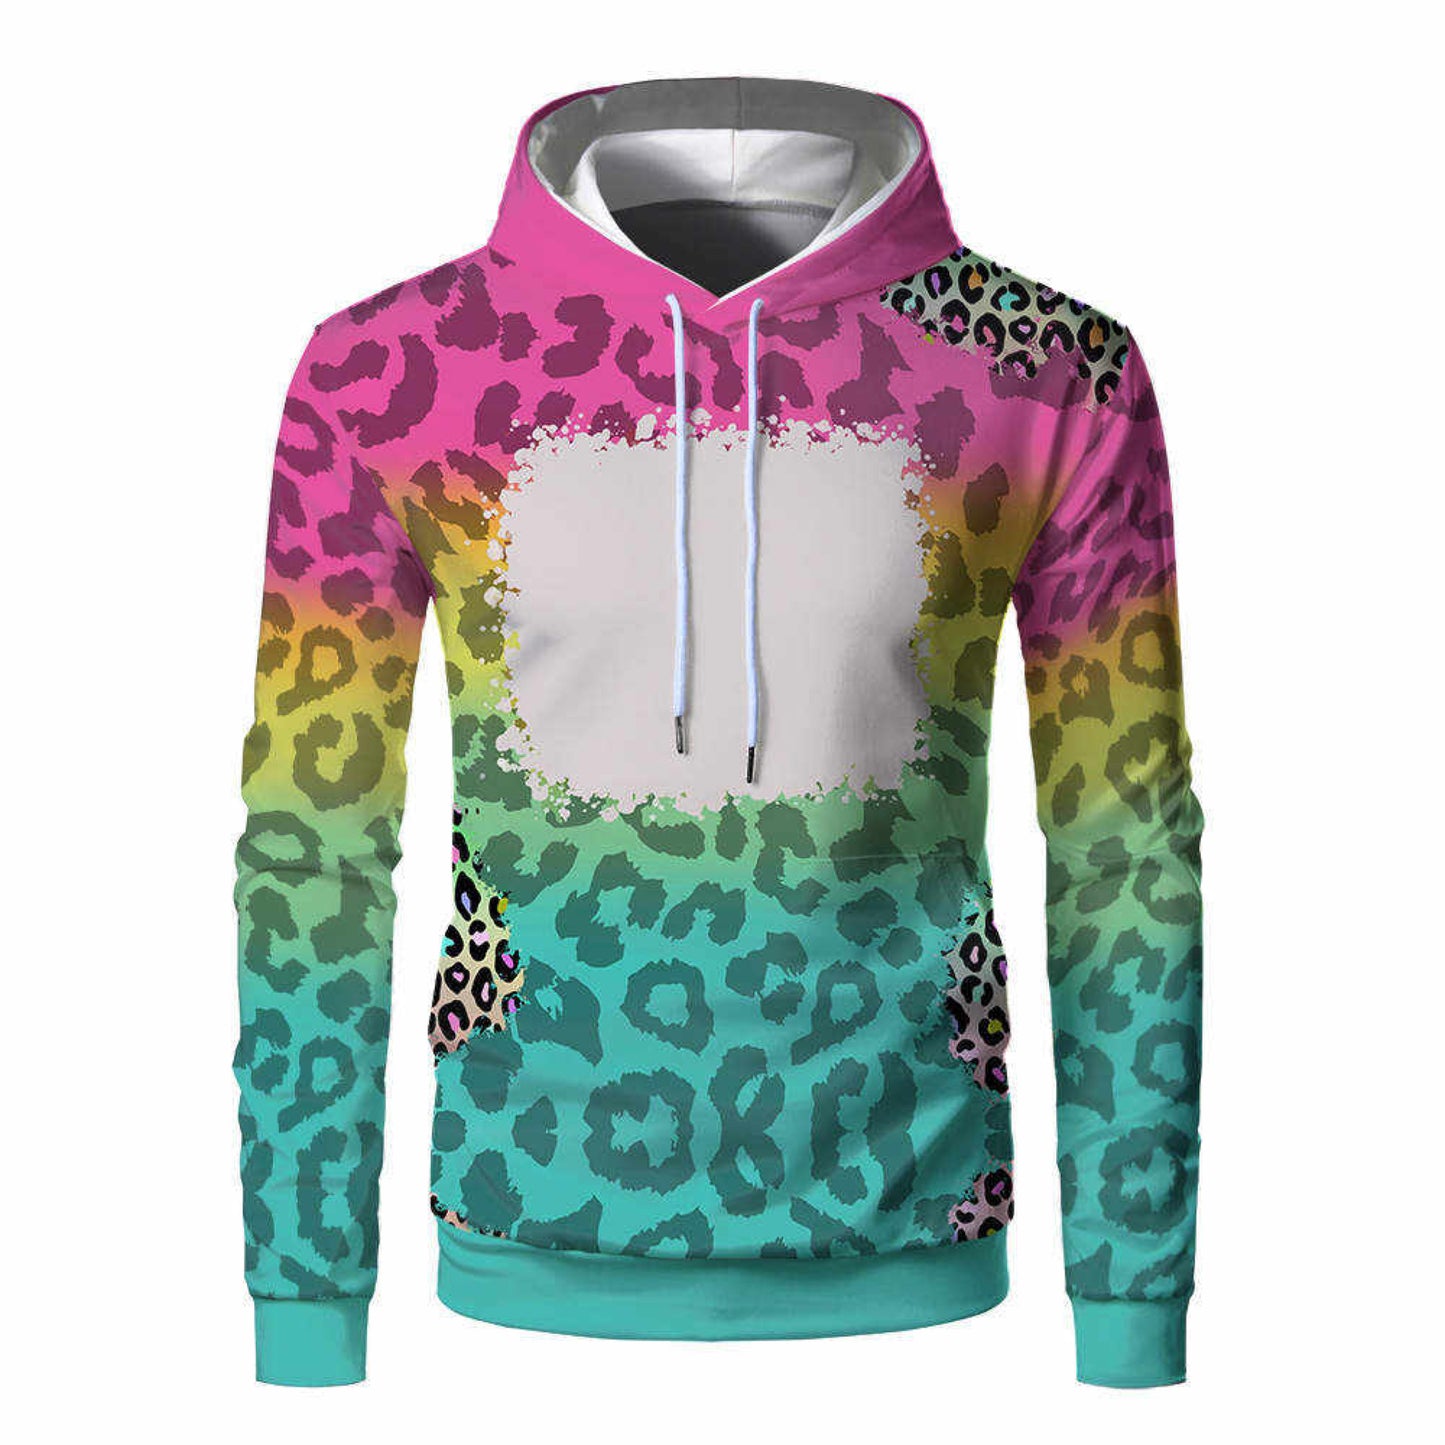 Sublimation Dyed Hoodies (1/2)